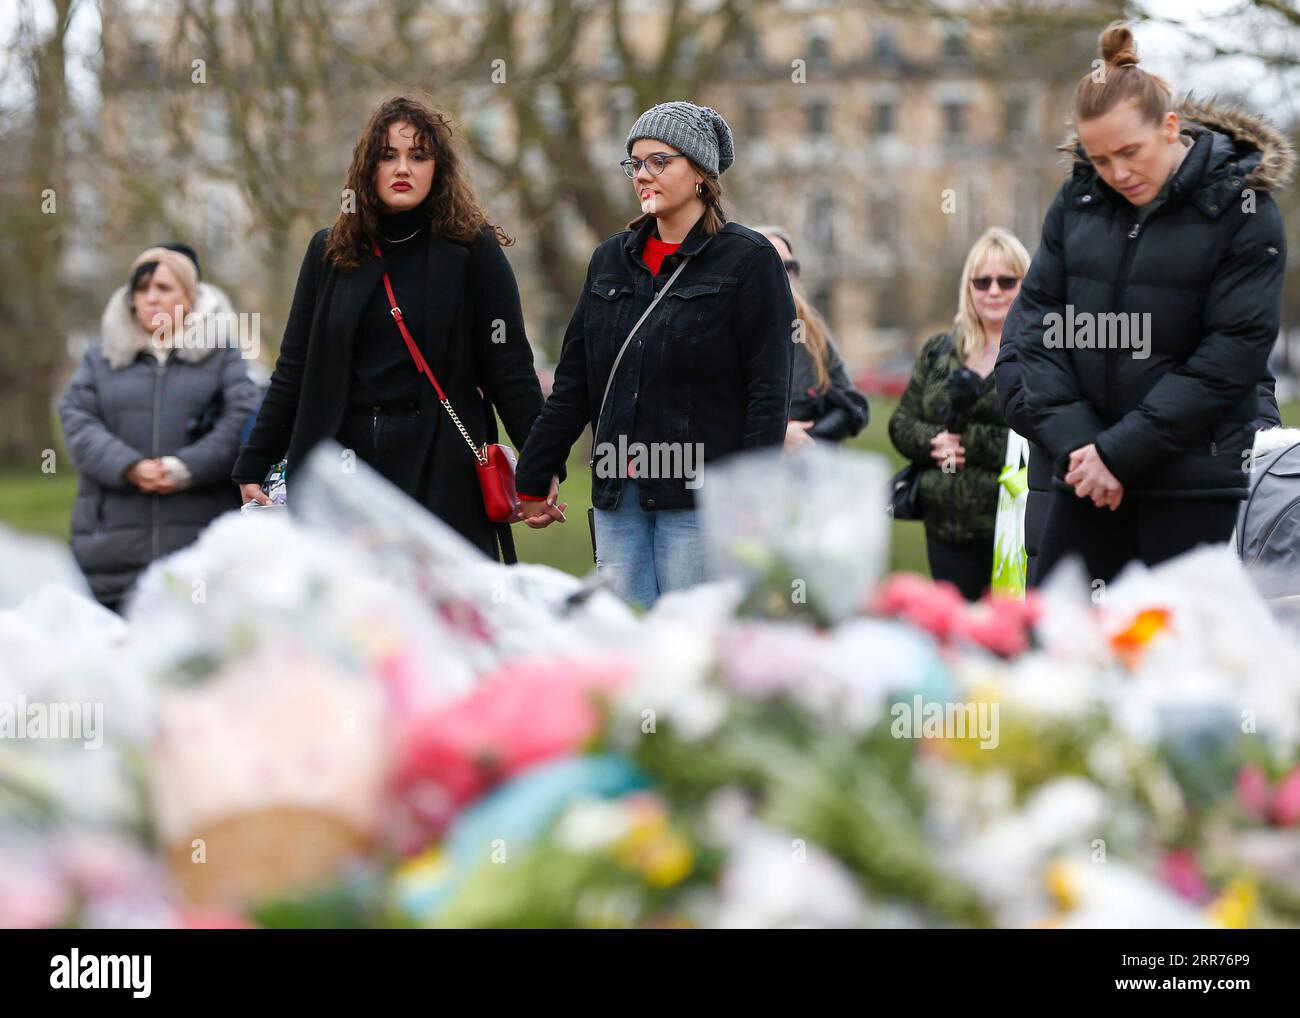 210316 -- LONDON, March 16, 2021 -- Women stand hand in hand next to floral tributes at the bandstand on Clapham Common to mourn for Sarah Everard in London, Britain, on March 15, 2021. A serving Metropolitan police officer on March 13 appeared in court in London after being charged with the kidnap and murder of a 33-year-old woman. Wayne Couzens, 48, was arrested after Sarah Everard, a marketing executive, went missing while walking home from a friend s apartment in south London on March 3. Everard s death has caused widespread concern in Britain about women s safety, with many women and girl Stock Photo